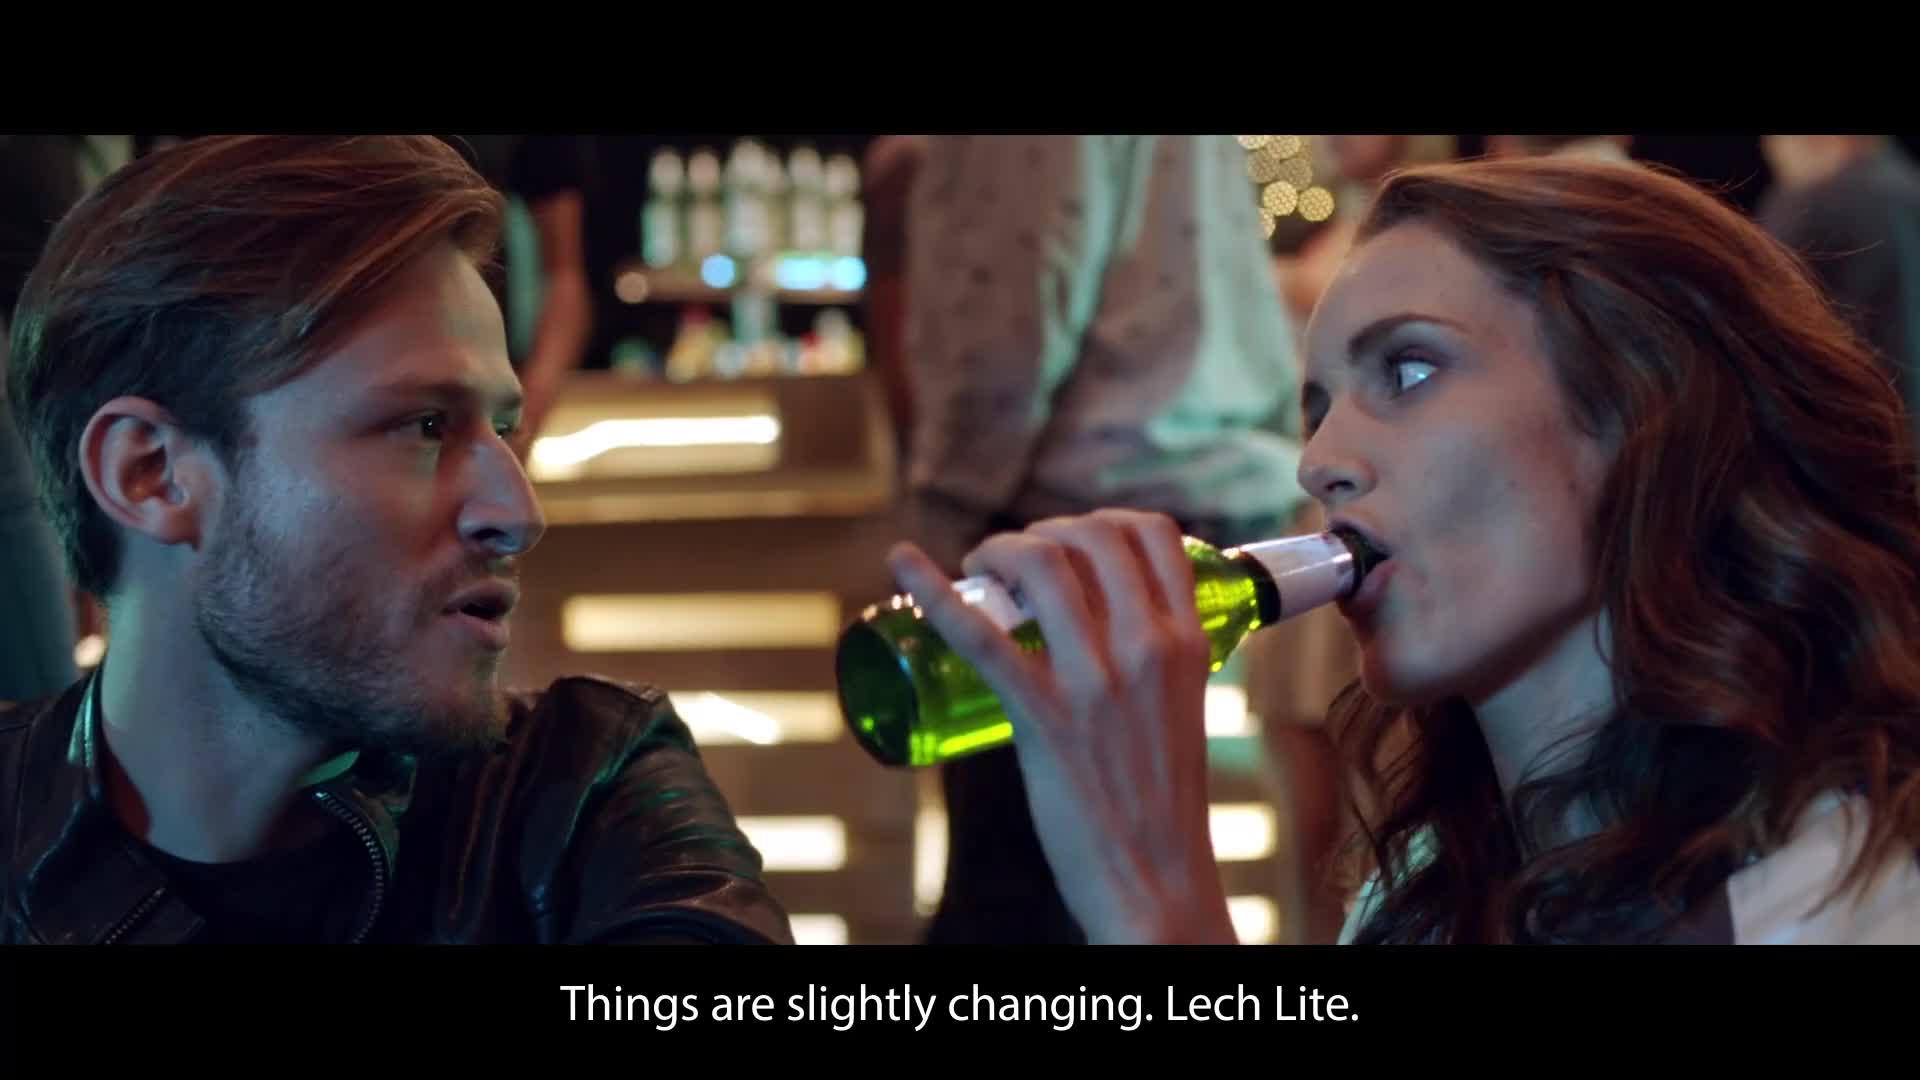 Lech Lite - Everything slightly changes